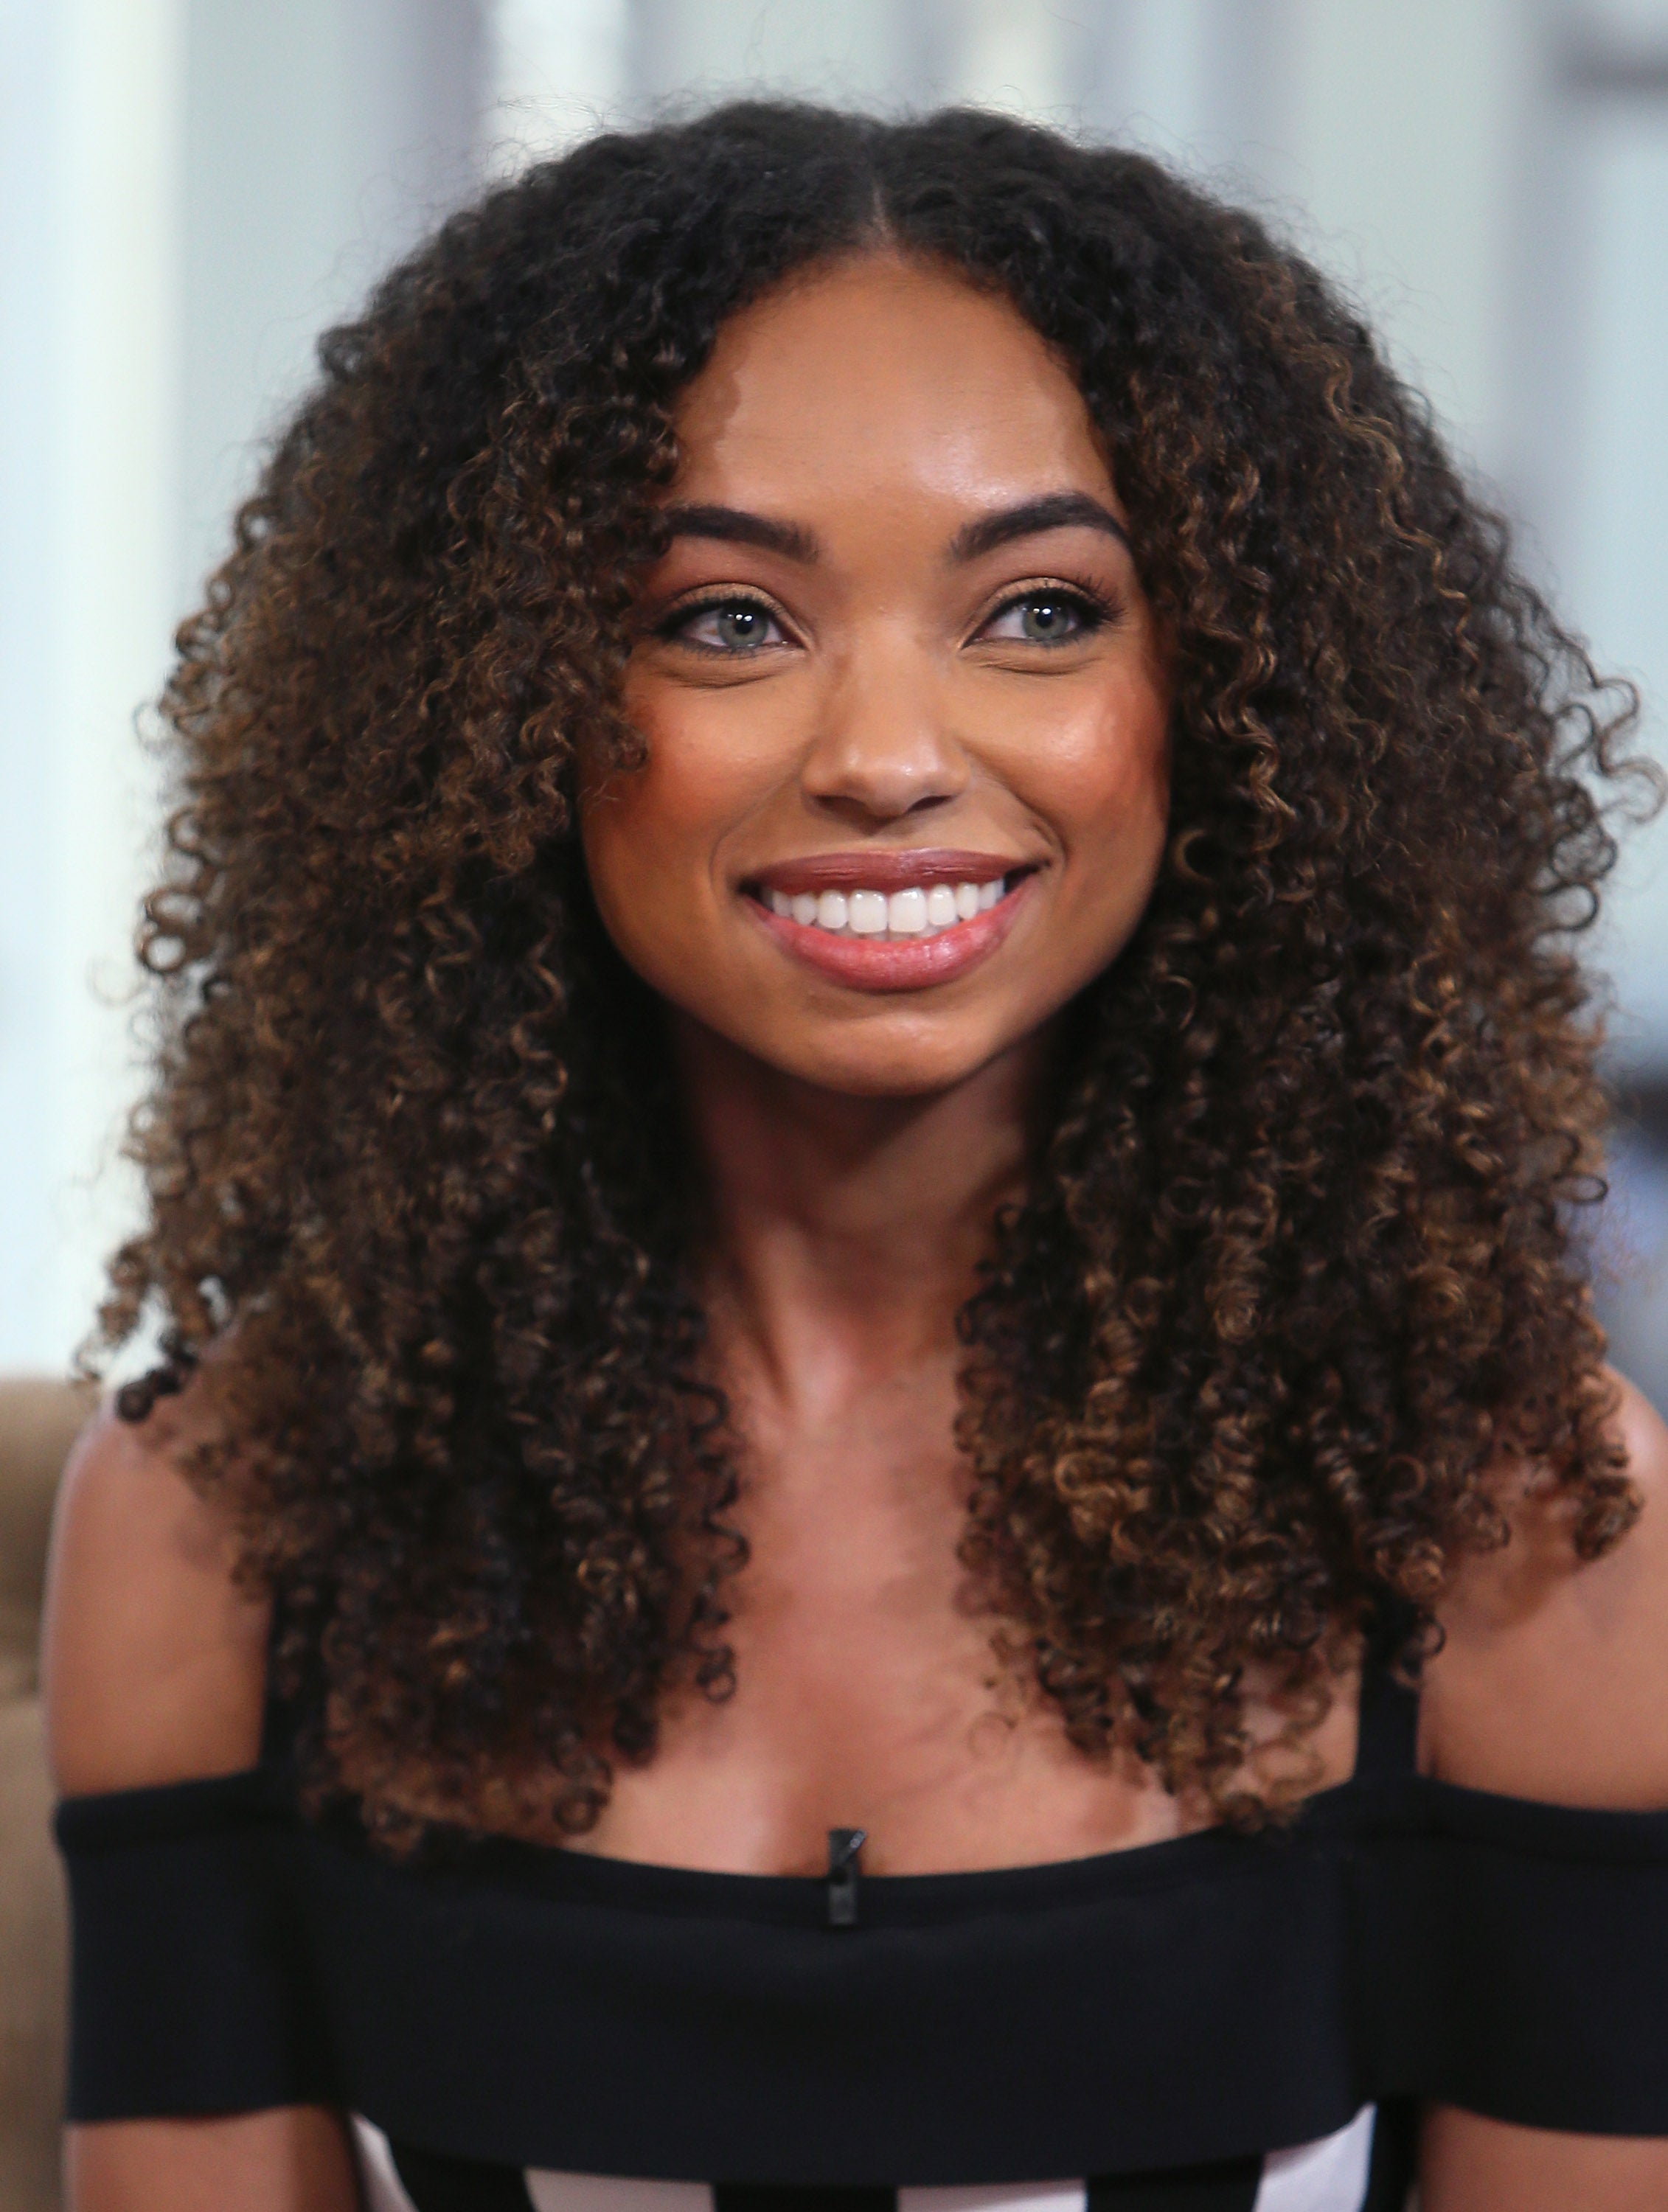 'Dear White People' Star Logan Browning Has A Message For Those Who 'Don't See Color'  
